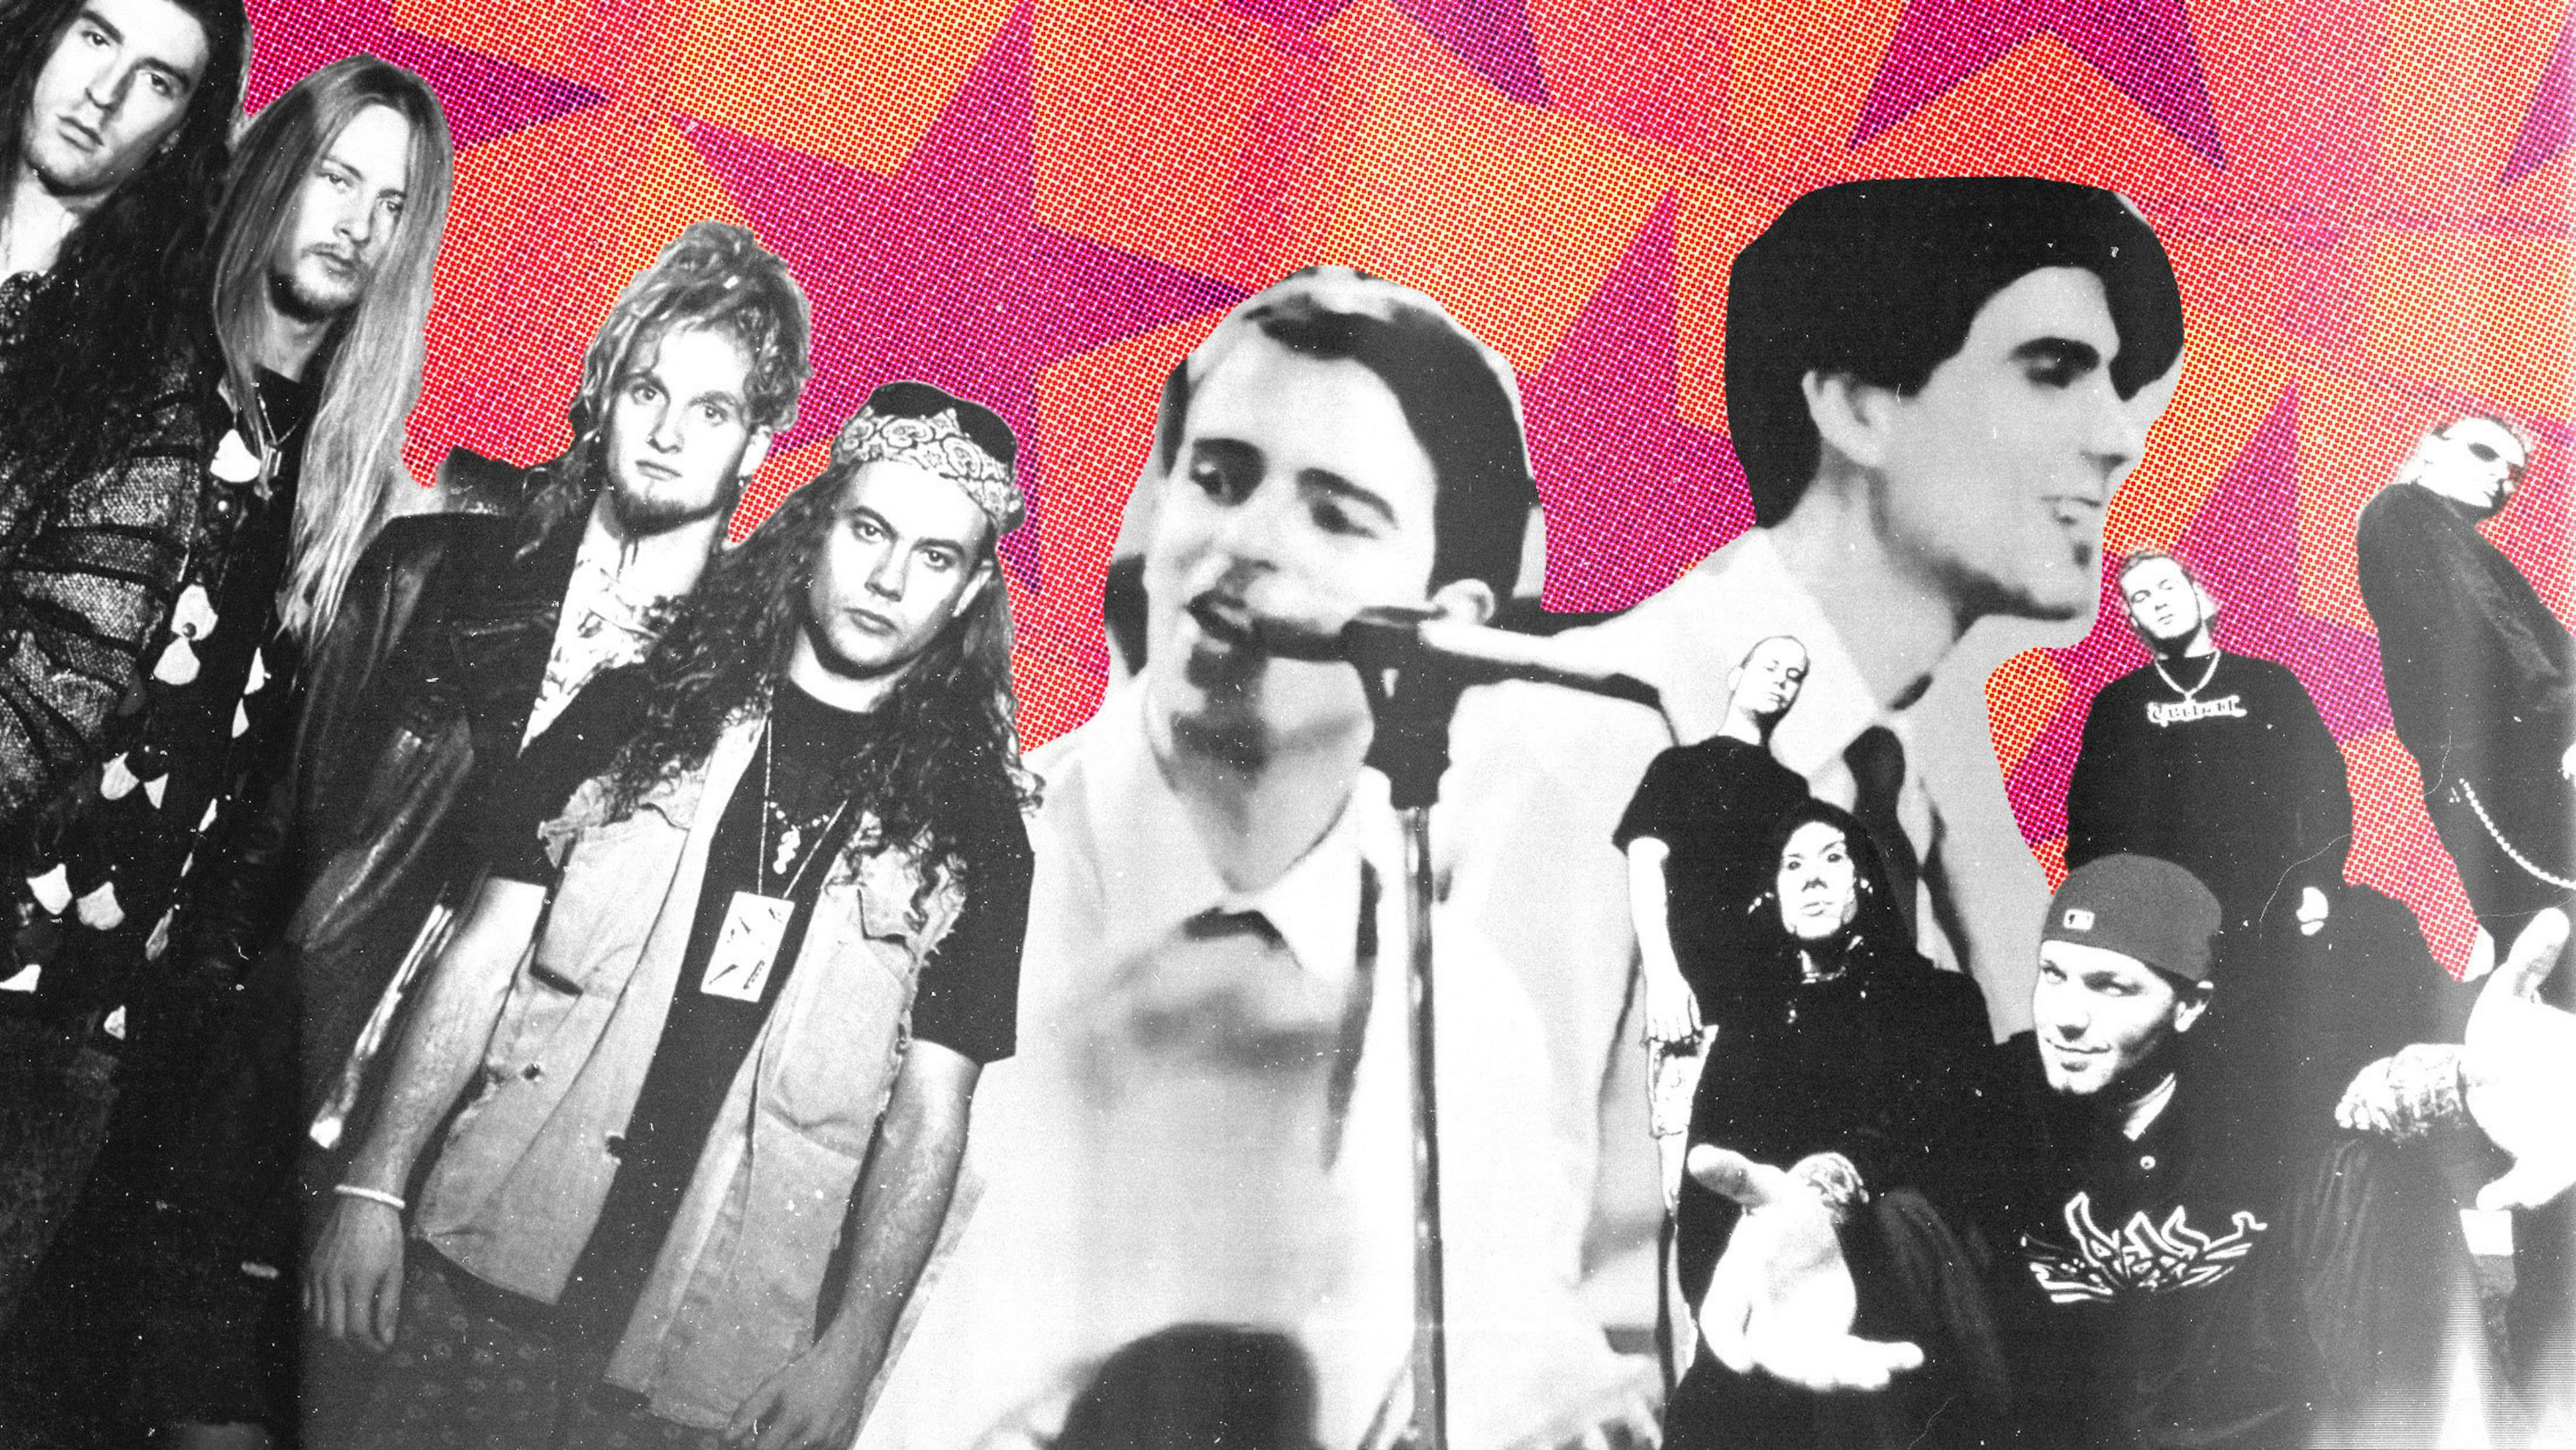 10 songs bands have written about other artists